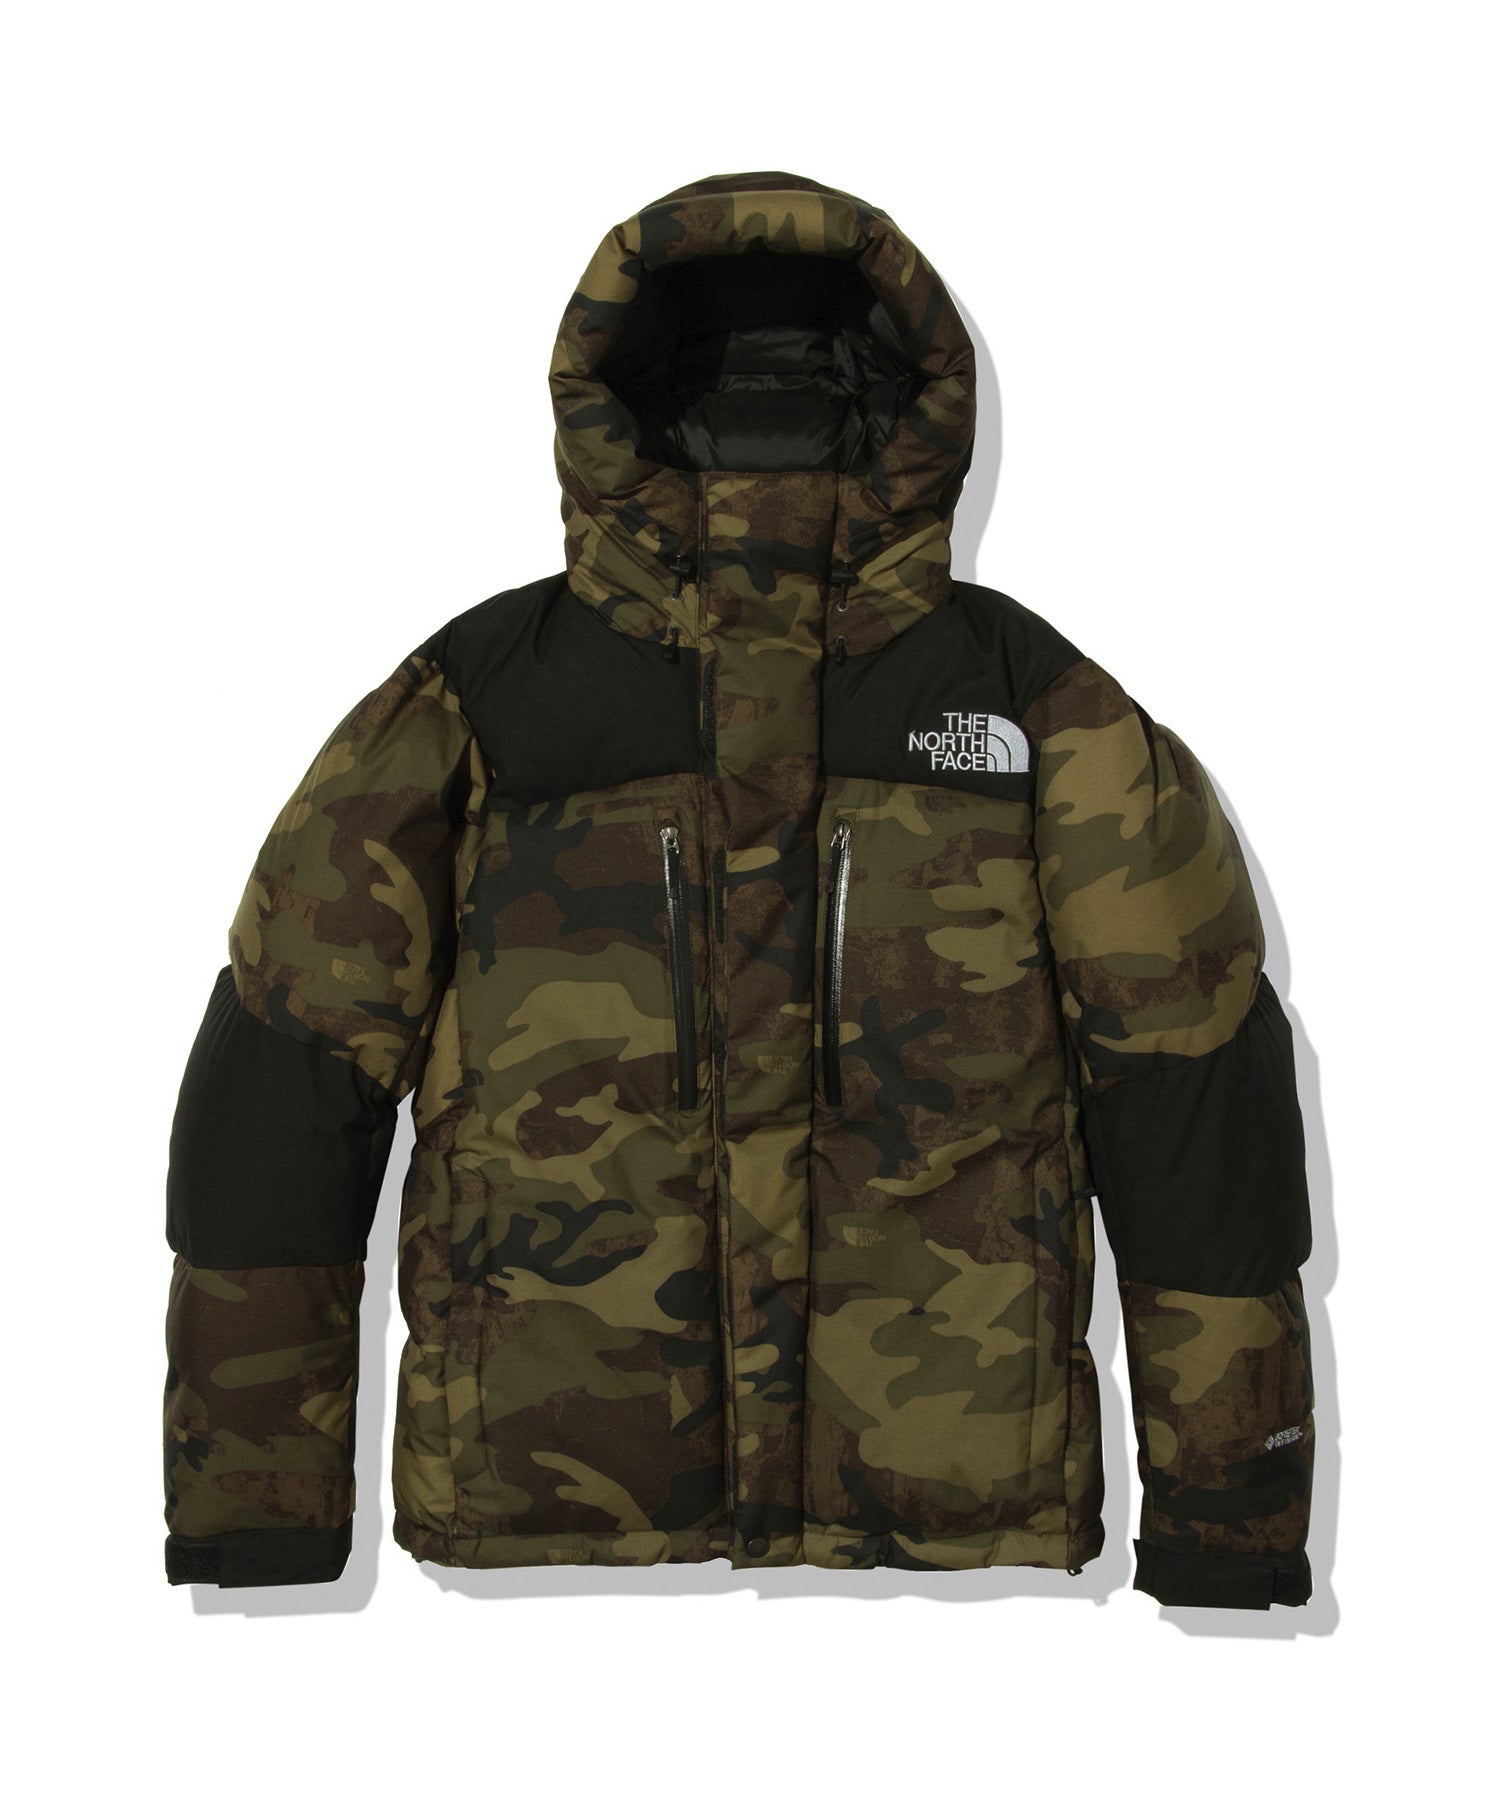 THE NORTH FACE】Novelty Baltro Light Jacket ｜ ADAM ET ROPE 